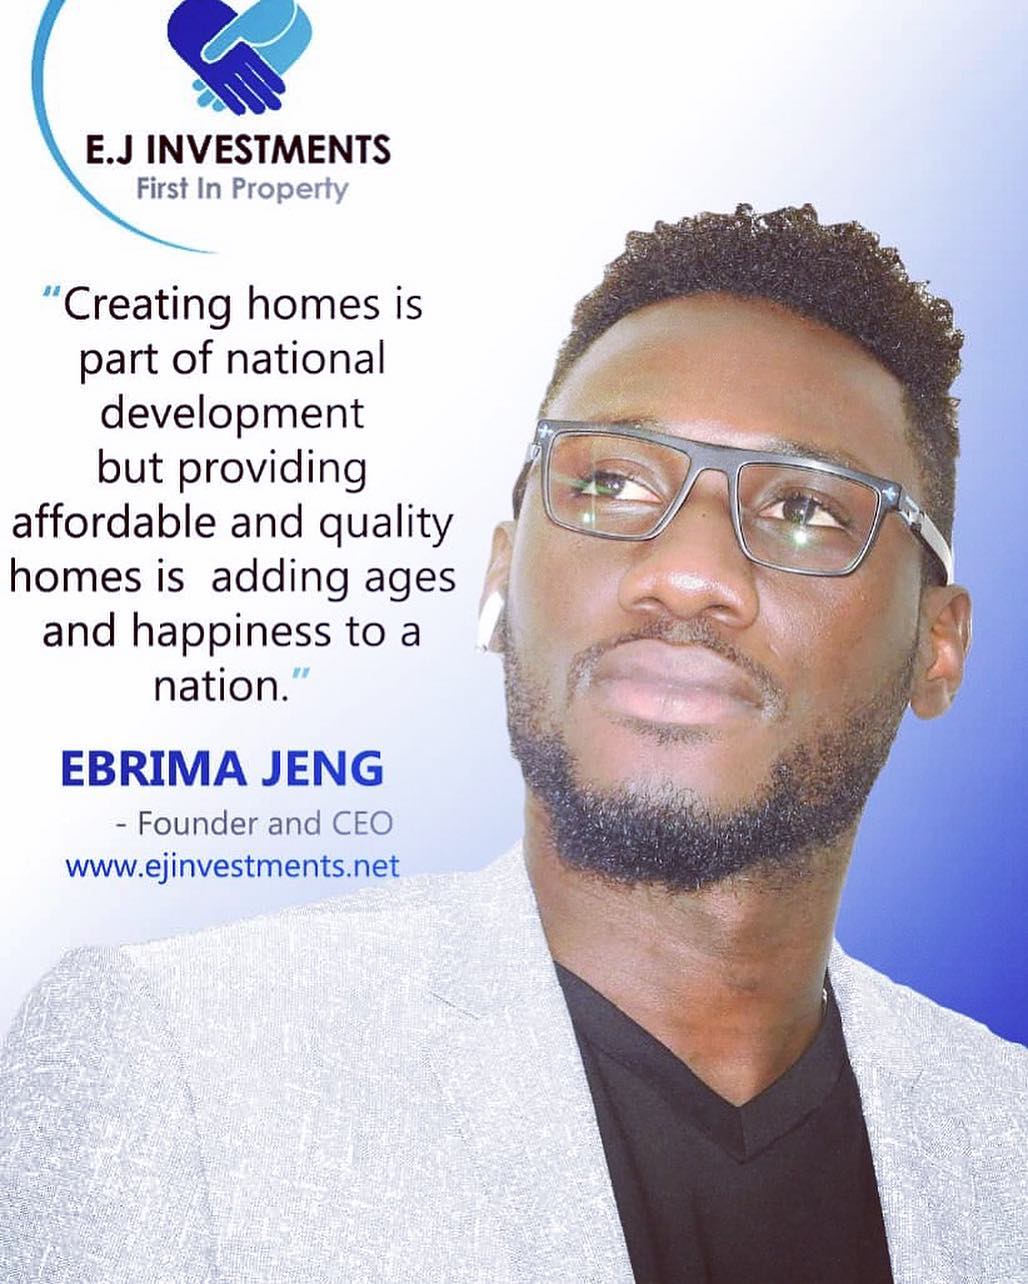 EJ Investments